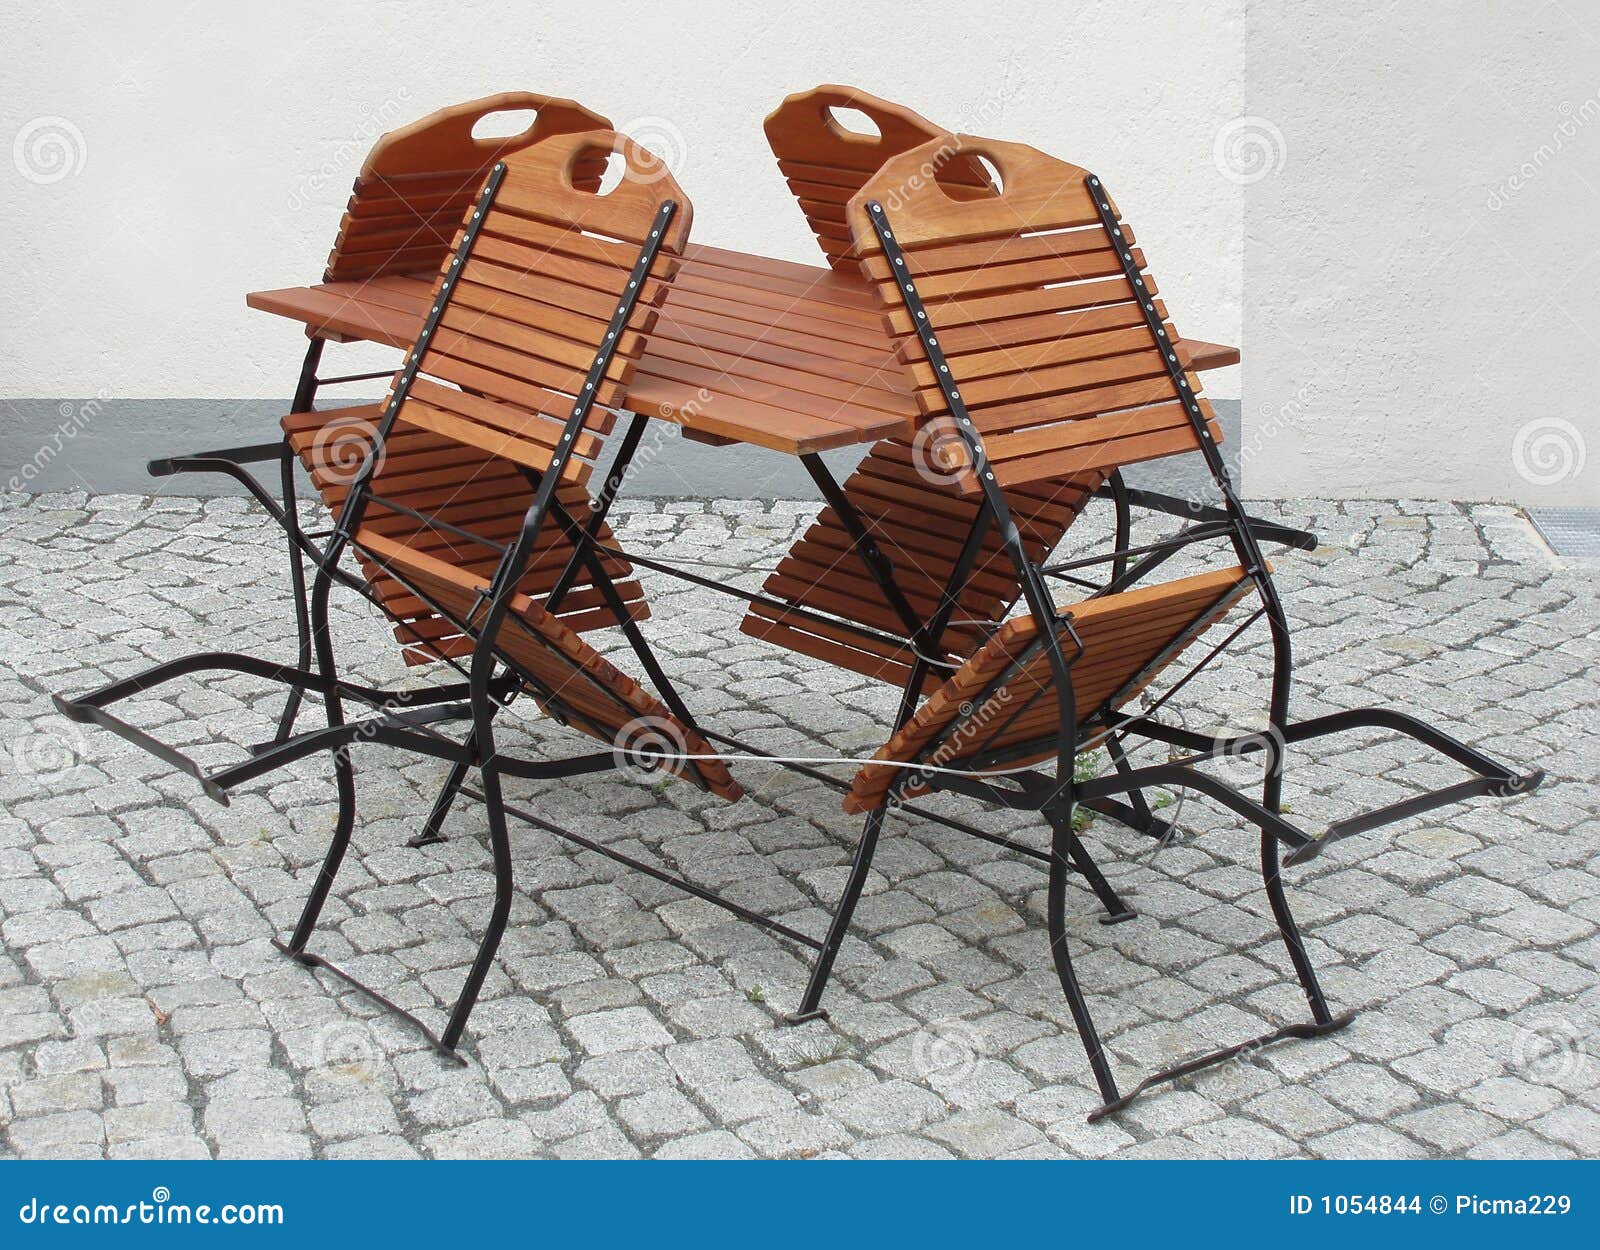 Bistro Table And Chairs Stock Images - Image: 1054844